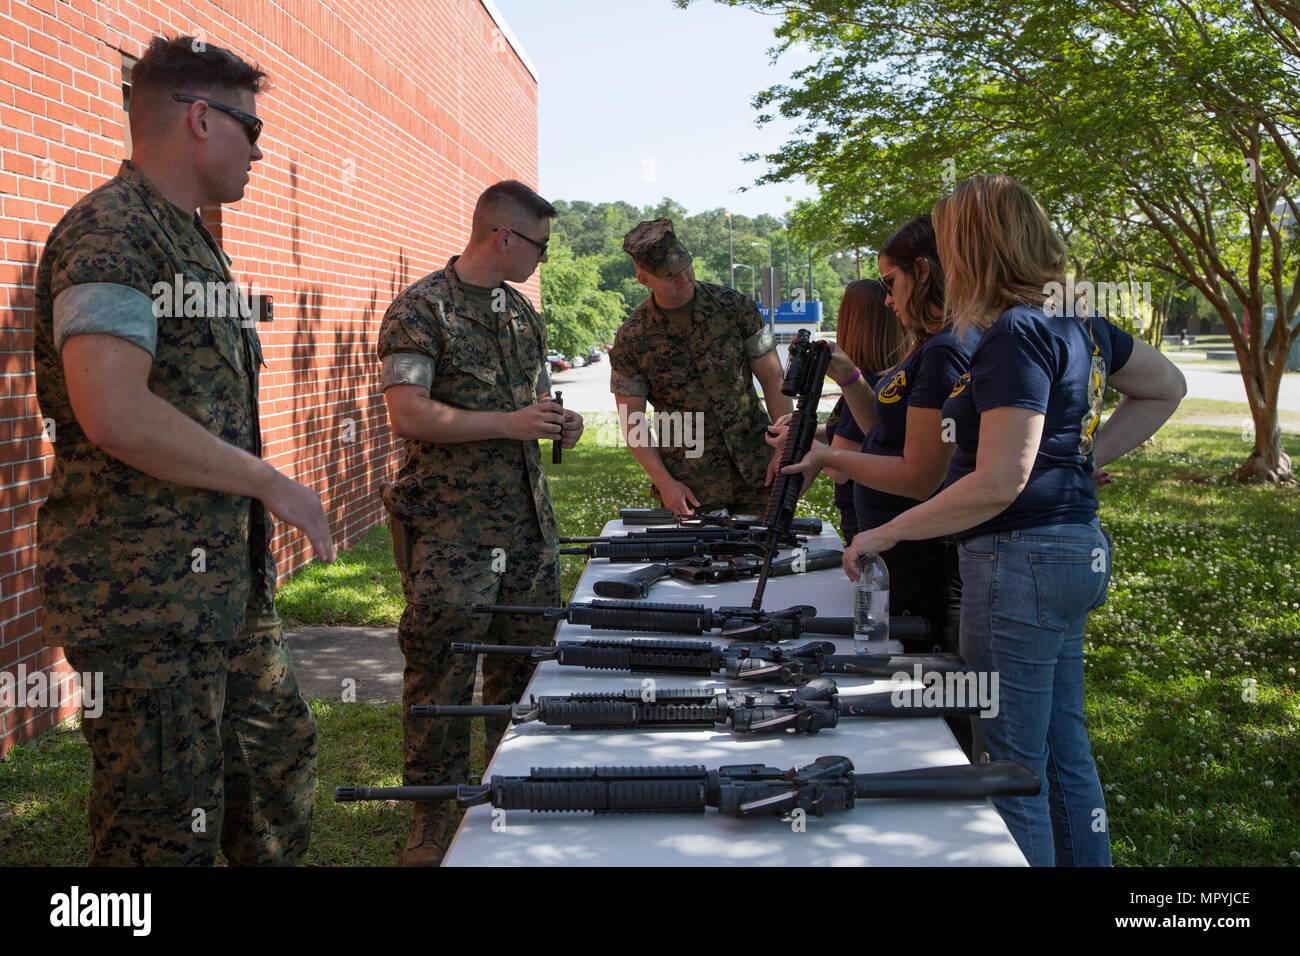 U.S. Marine Corps Corporal Philip J. Breuer, left, and Lance Cpl. Daniel J. Scansen teach the nomenclature of an M16A4 Service Rifle to spouses and family members of Marines and Sailors with II Marine Expeditionary Force (II MEF) during “In Their Boots” day on Camp Lejeune, N.C., April 21, 2017. “In Their Boots” day is an event in which spouses and family members of Marines and Sailors with II MEF are able to participate in various Marine Corps related events and exercises. (U.S. Marine Corps photo by Lance Cpl. Taylor N. Cooper) Stock Photo